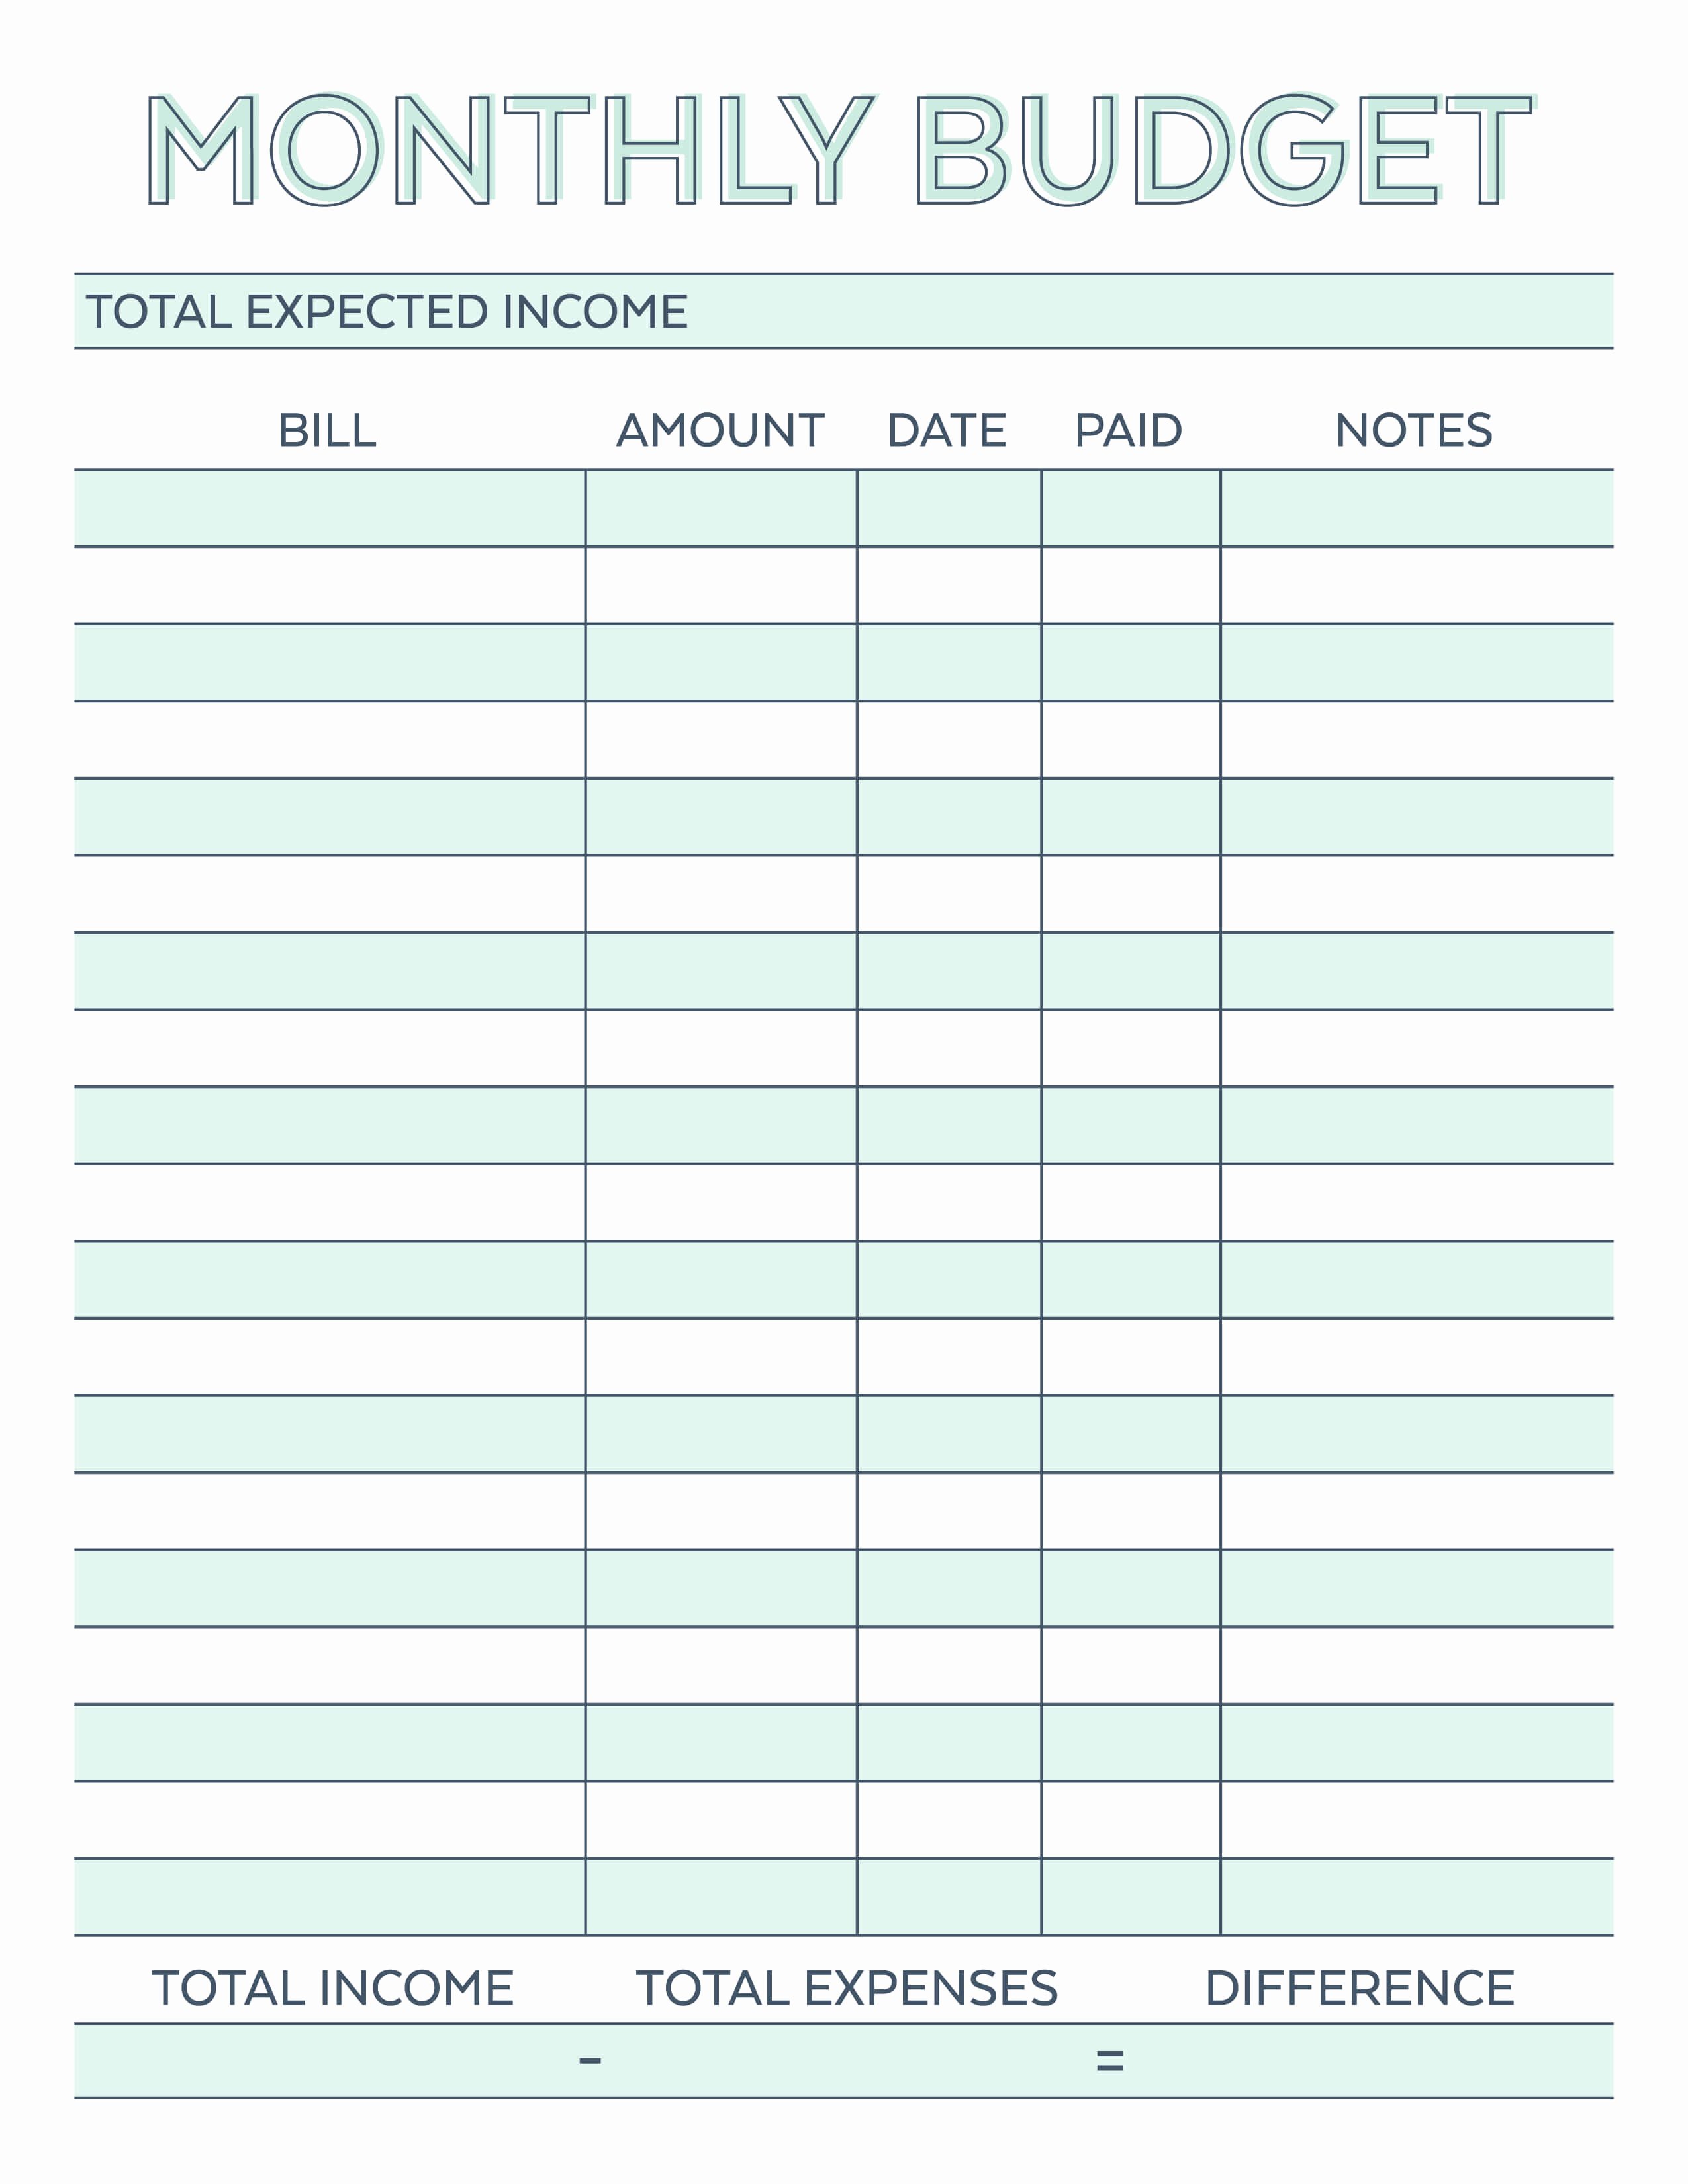 Monthly Budget Planner Template Best Of Monthly Bud Planner Free Printable Bud Worksheet